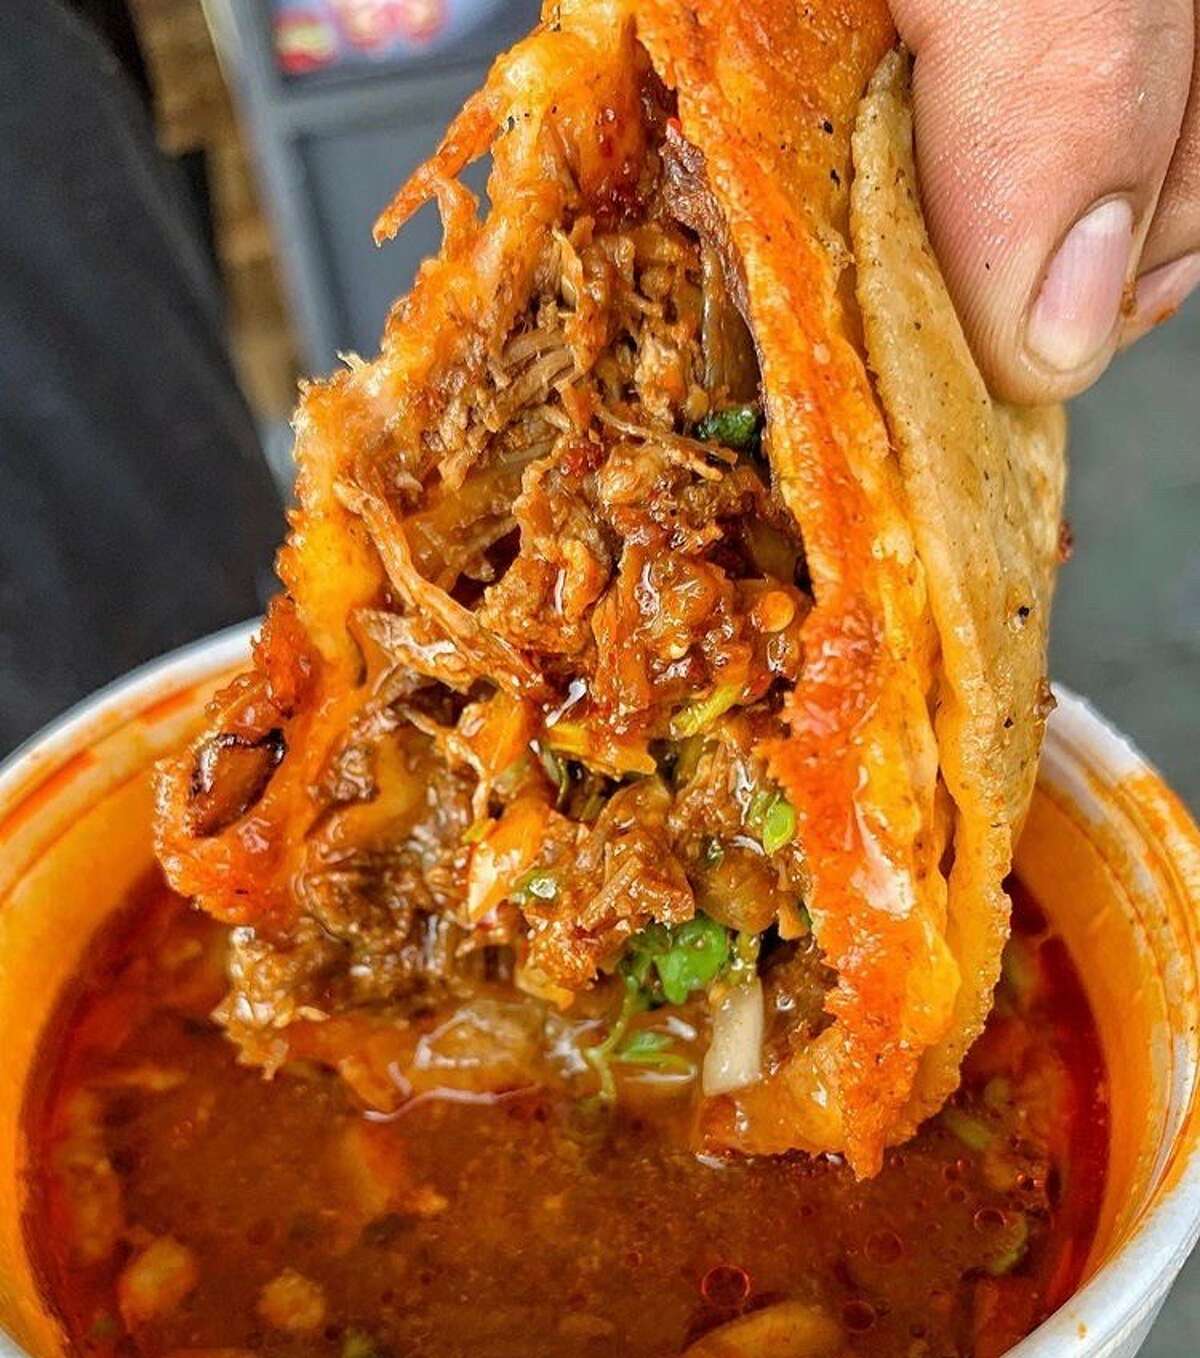 Here's where you can get birria tacos in San Antonio